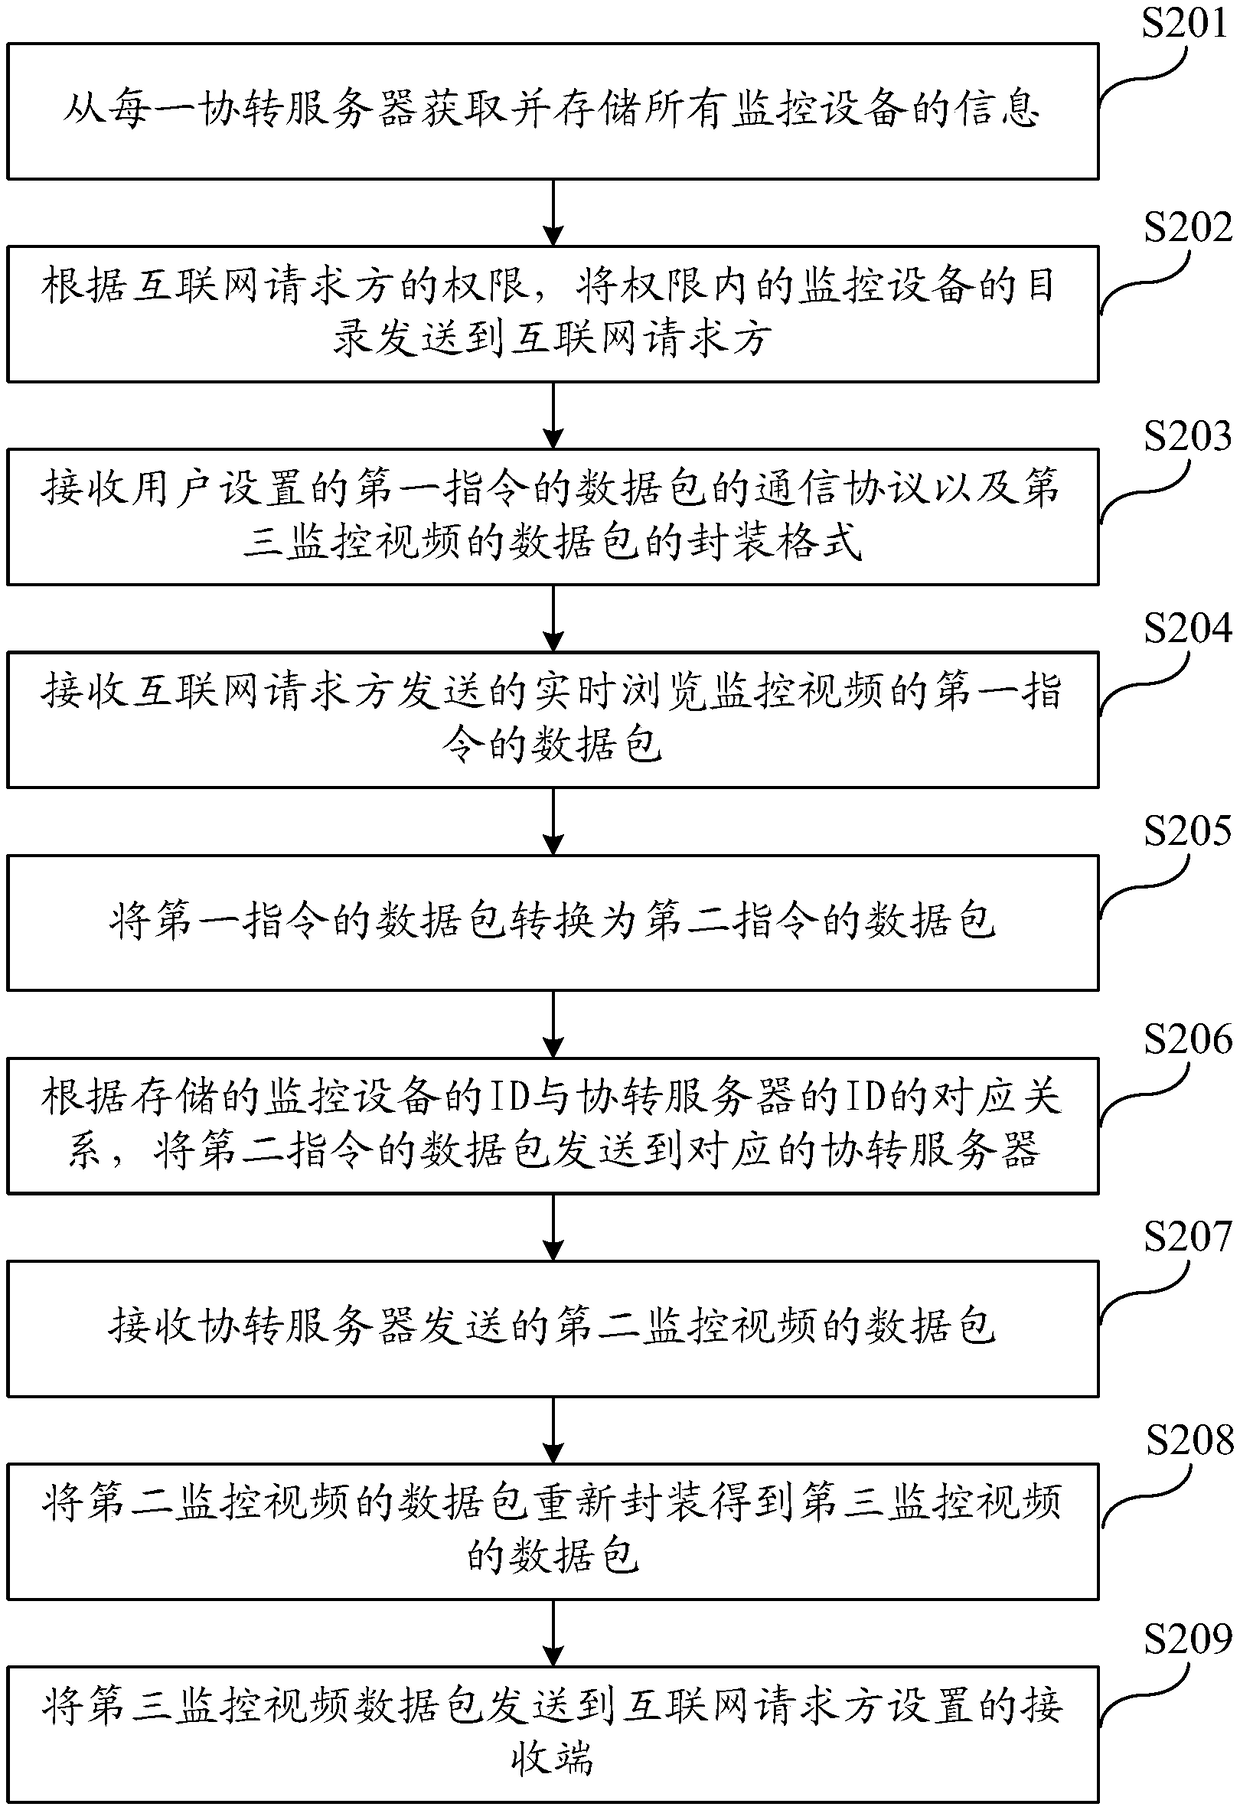 Monitoring video sharing method and device